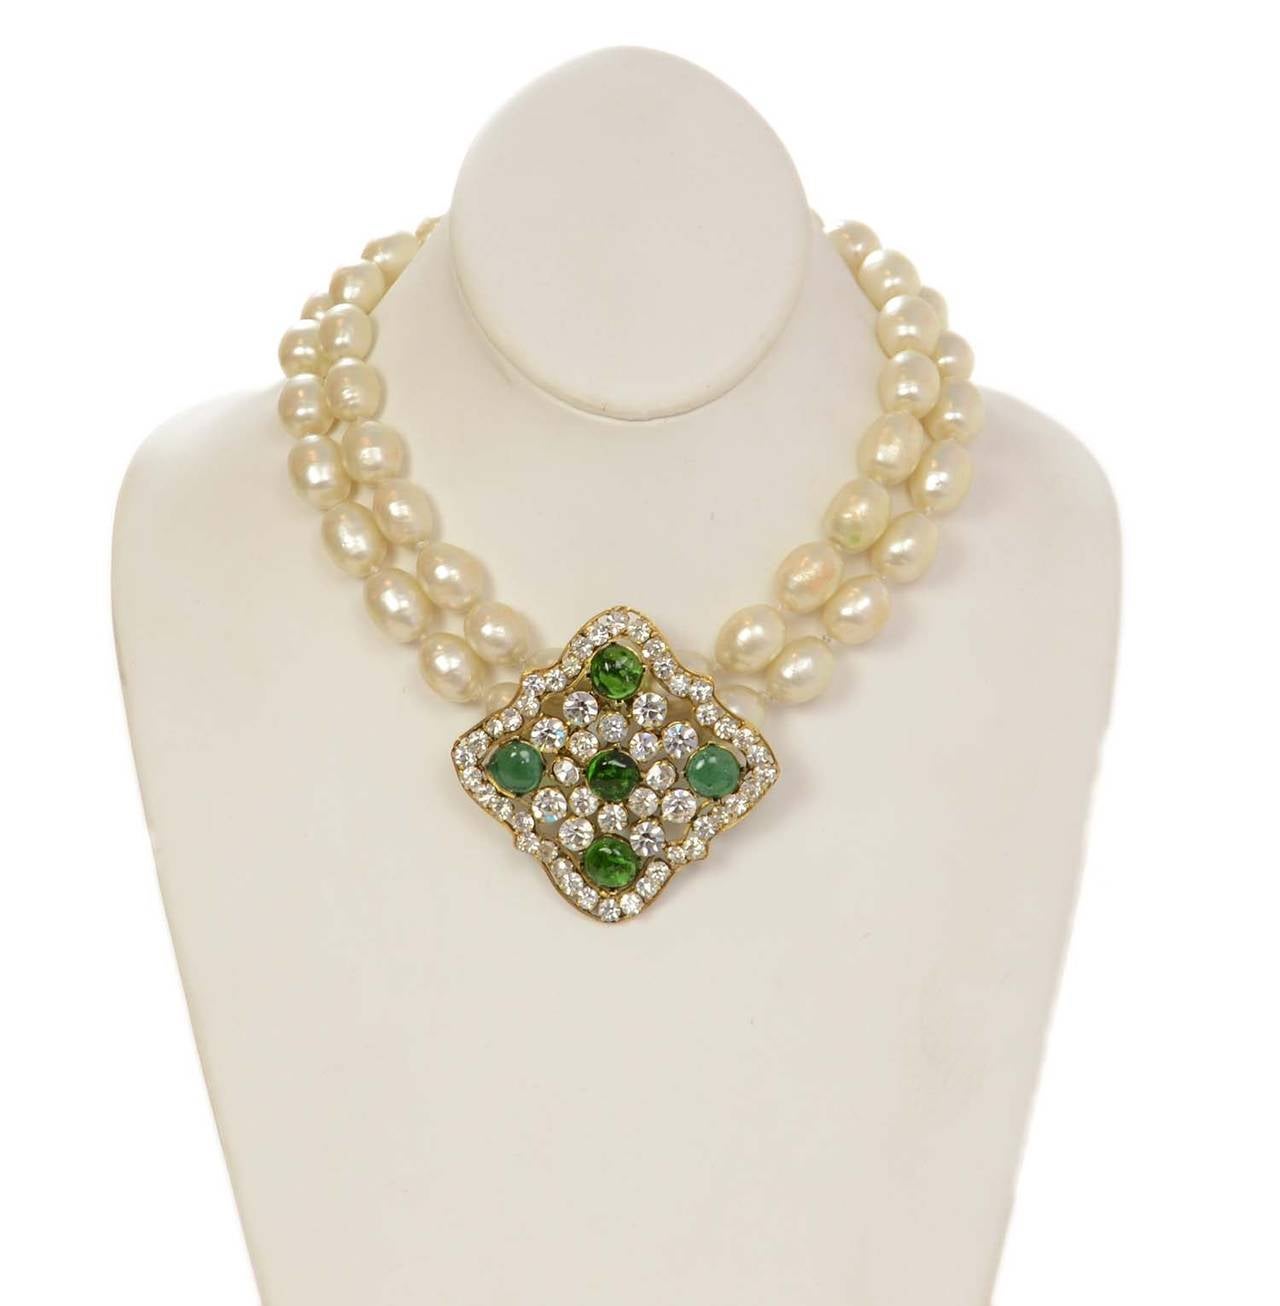 Chanel Vintage 2 Strand Pearl Necklace w/Rhinestone & Green Gripoix Pendant

    Made in: France
    Stamp: CHANEL CC MADE IN FRANCE
    Closure: Hook with adjustable length
    Color: Gold, ivory, and green
    Materials: Metal, faux pearls,